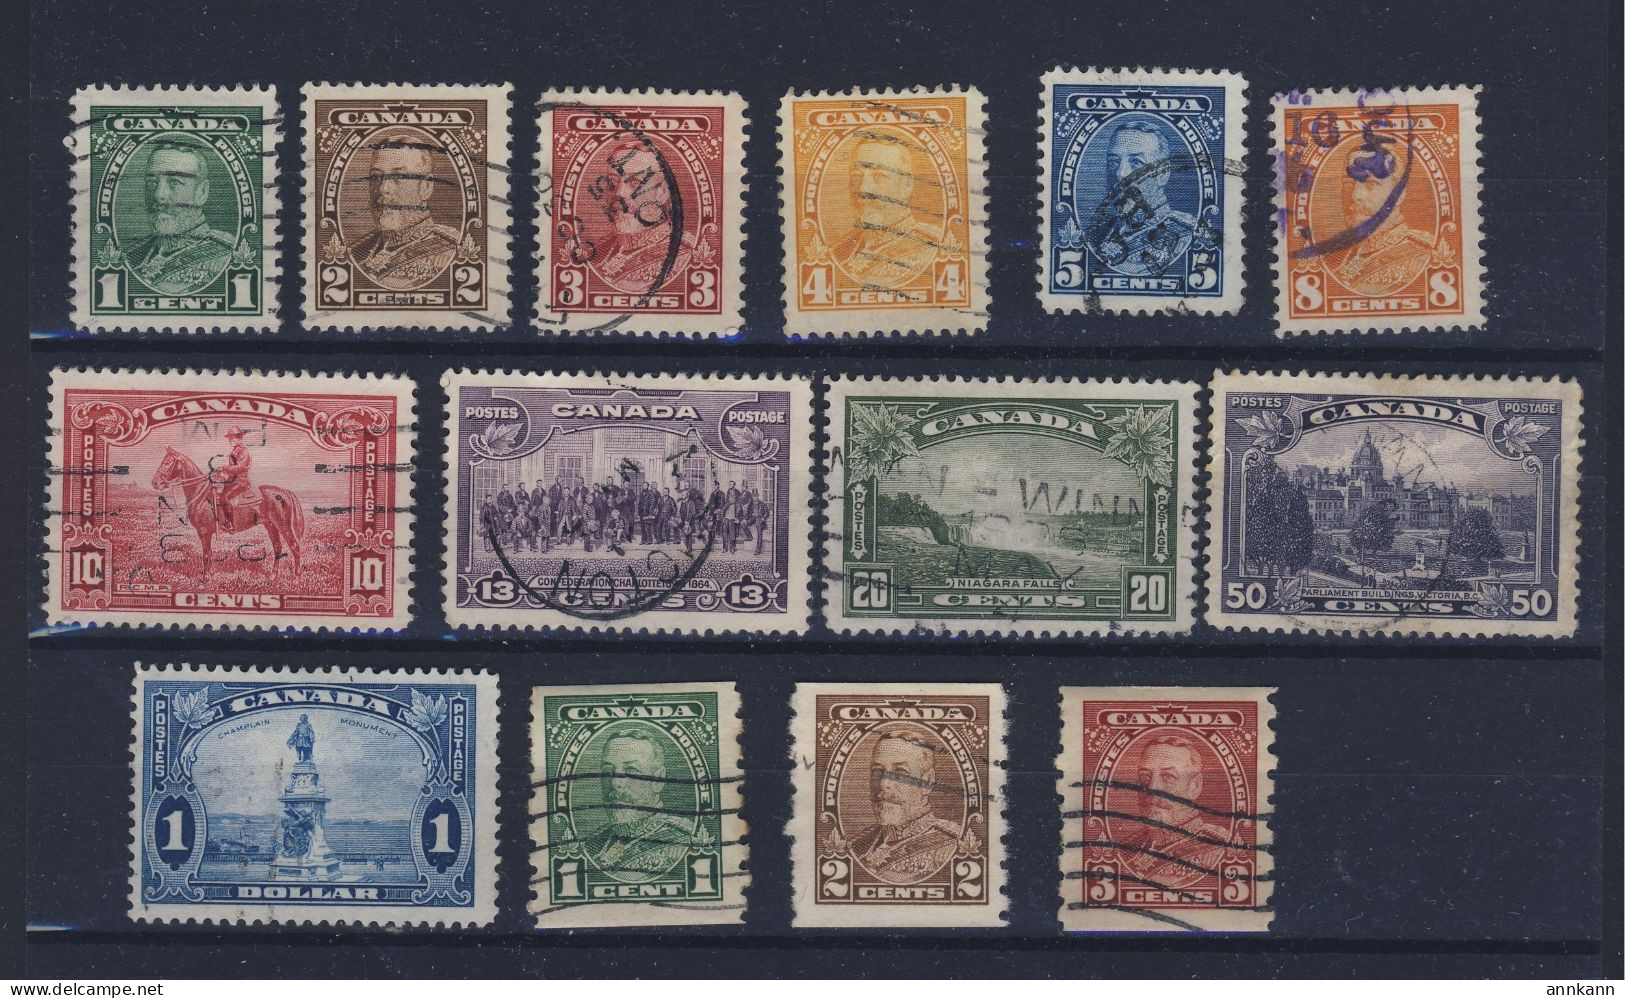 14x Canada Stamps: USED VF - #217 To 227-$1.00 #228-229-230 Coils. Guide Value = $41.00 - Used Stamps